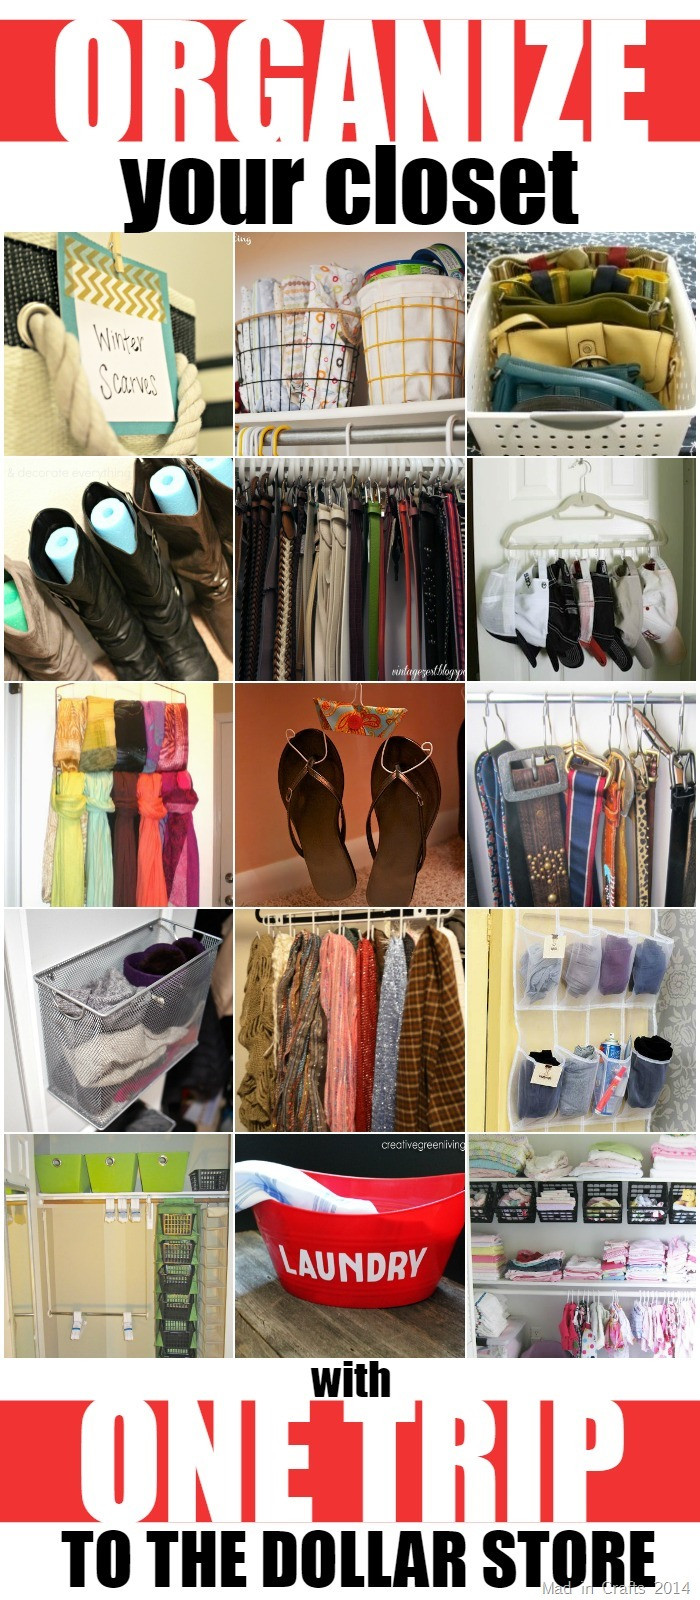 How To Organize Your Closet DIY
 ORGANIZE YOUR CLOSET WITH ONE TRIP TO THE DOLLAR STORE Mad